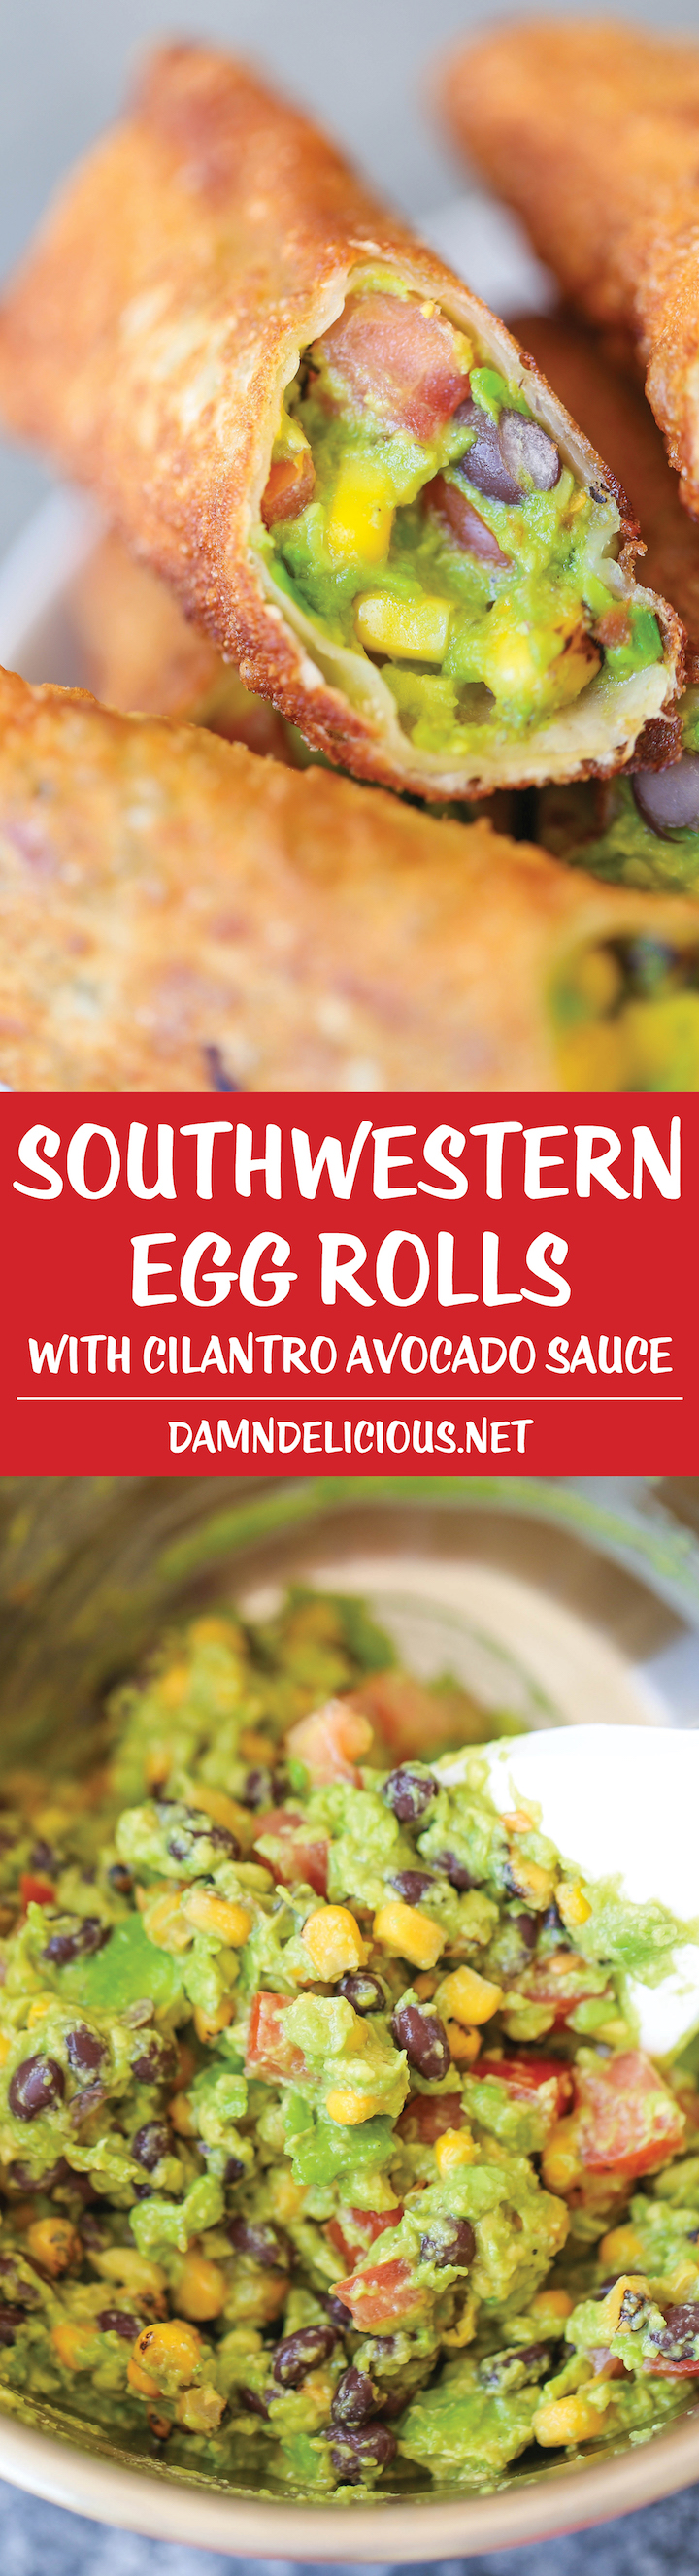 Southwestern Egg Rolls with Cilantro Avocado Sauce - Loaded with avocado, corn, beans and tomatoes! And you'll never guess that it's completely baked!